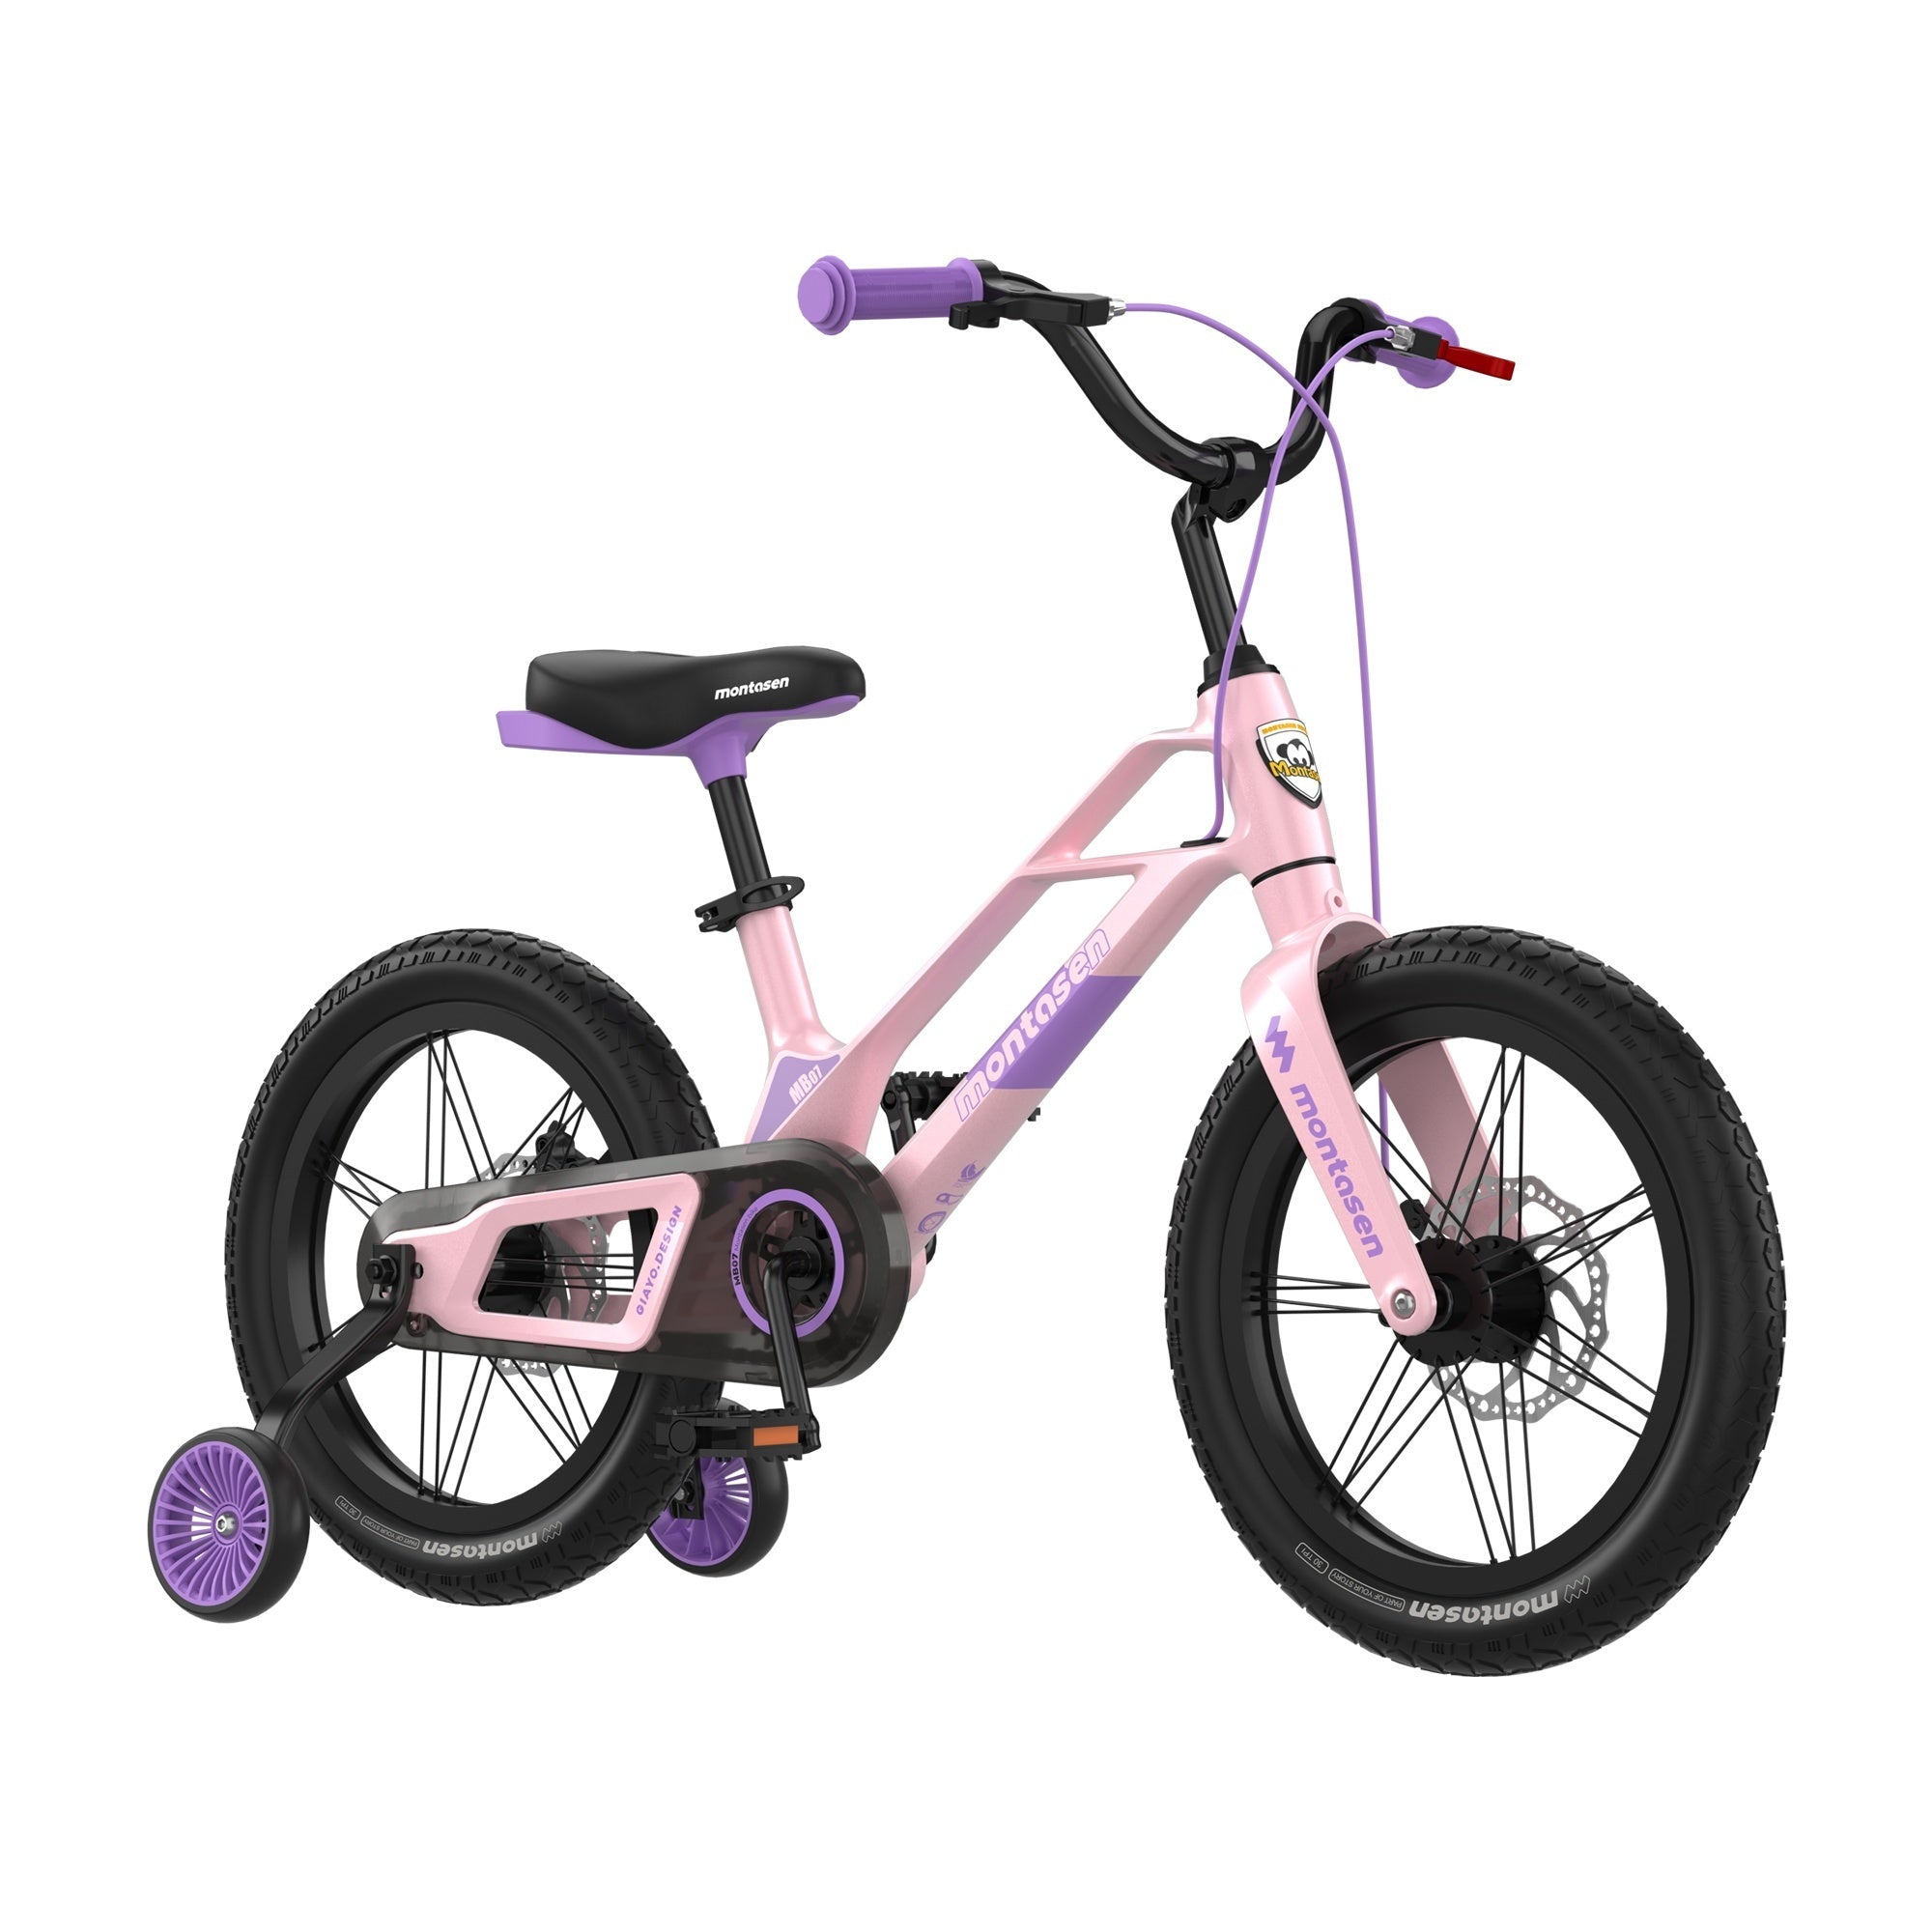 Montasen-Kids-Bike-16-Inch-Bicycle-for-Boys-Girls-Ages-4-8-Years,-Lightweight-Magnesium-Alloy-Frame,-Disc-Adjustable-Handlebar-Training-Wheels-Pink-Purple-Color-